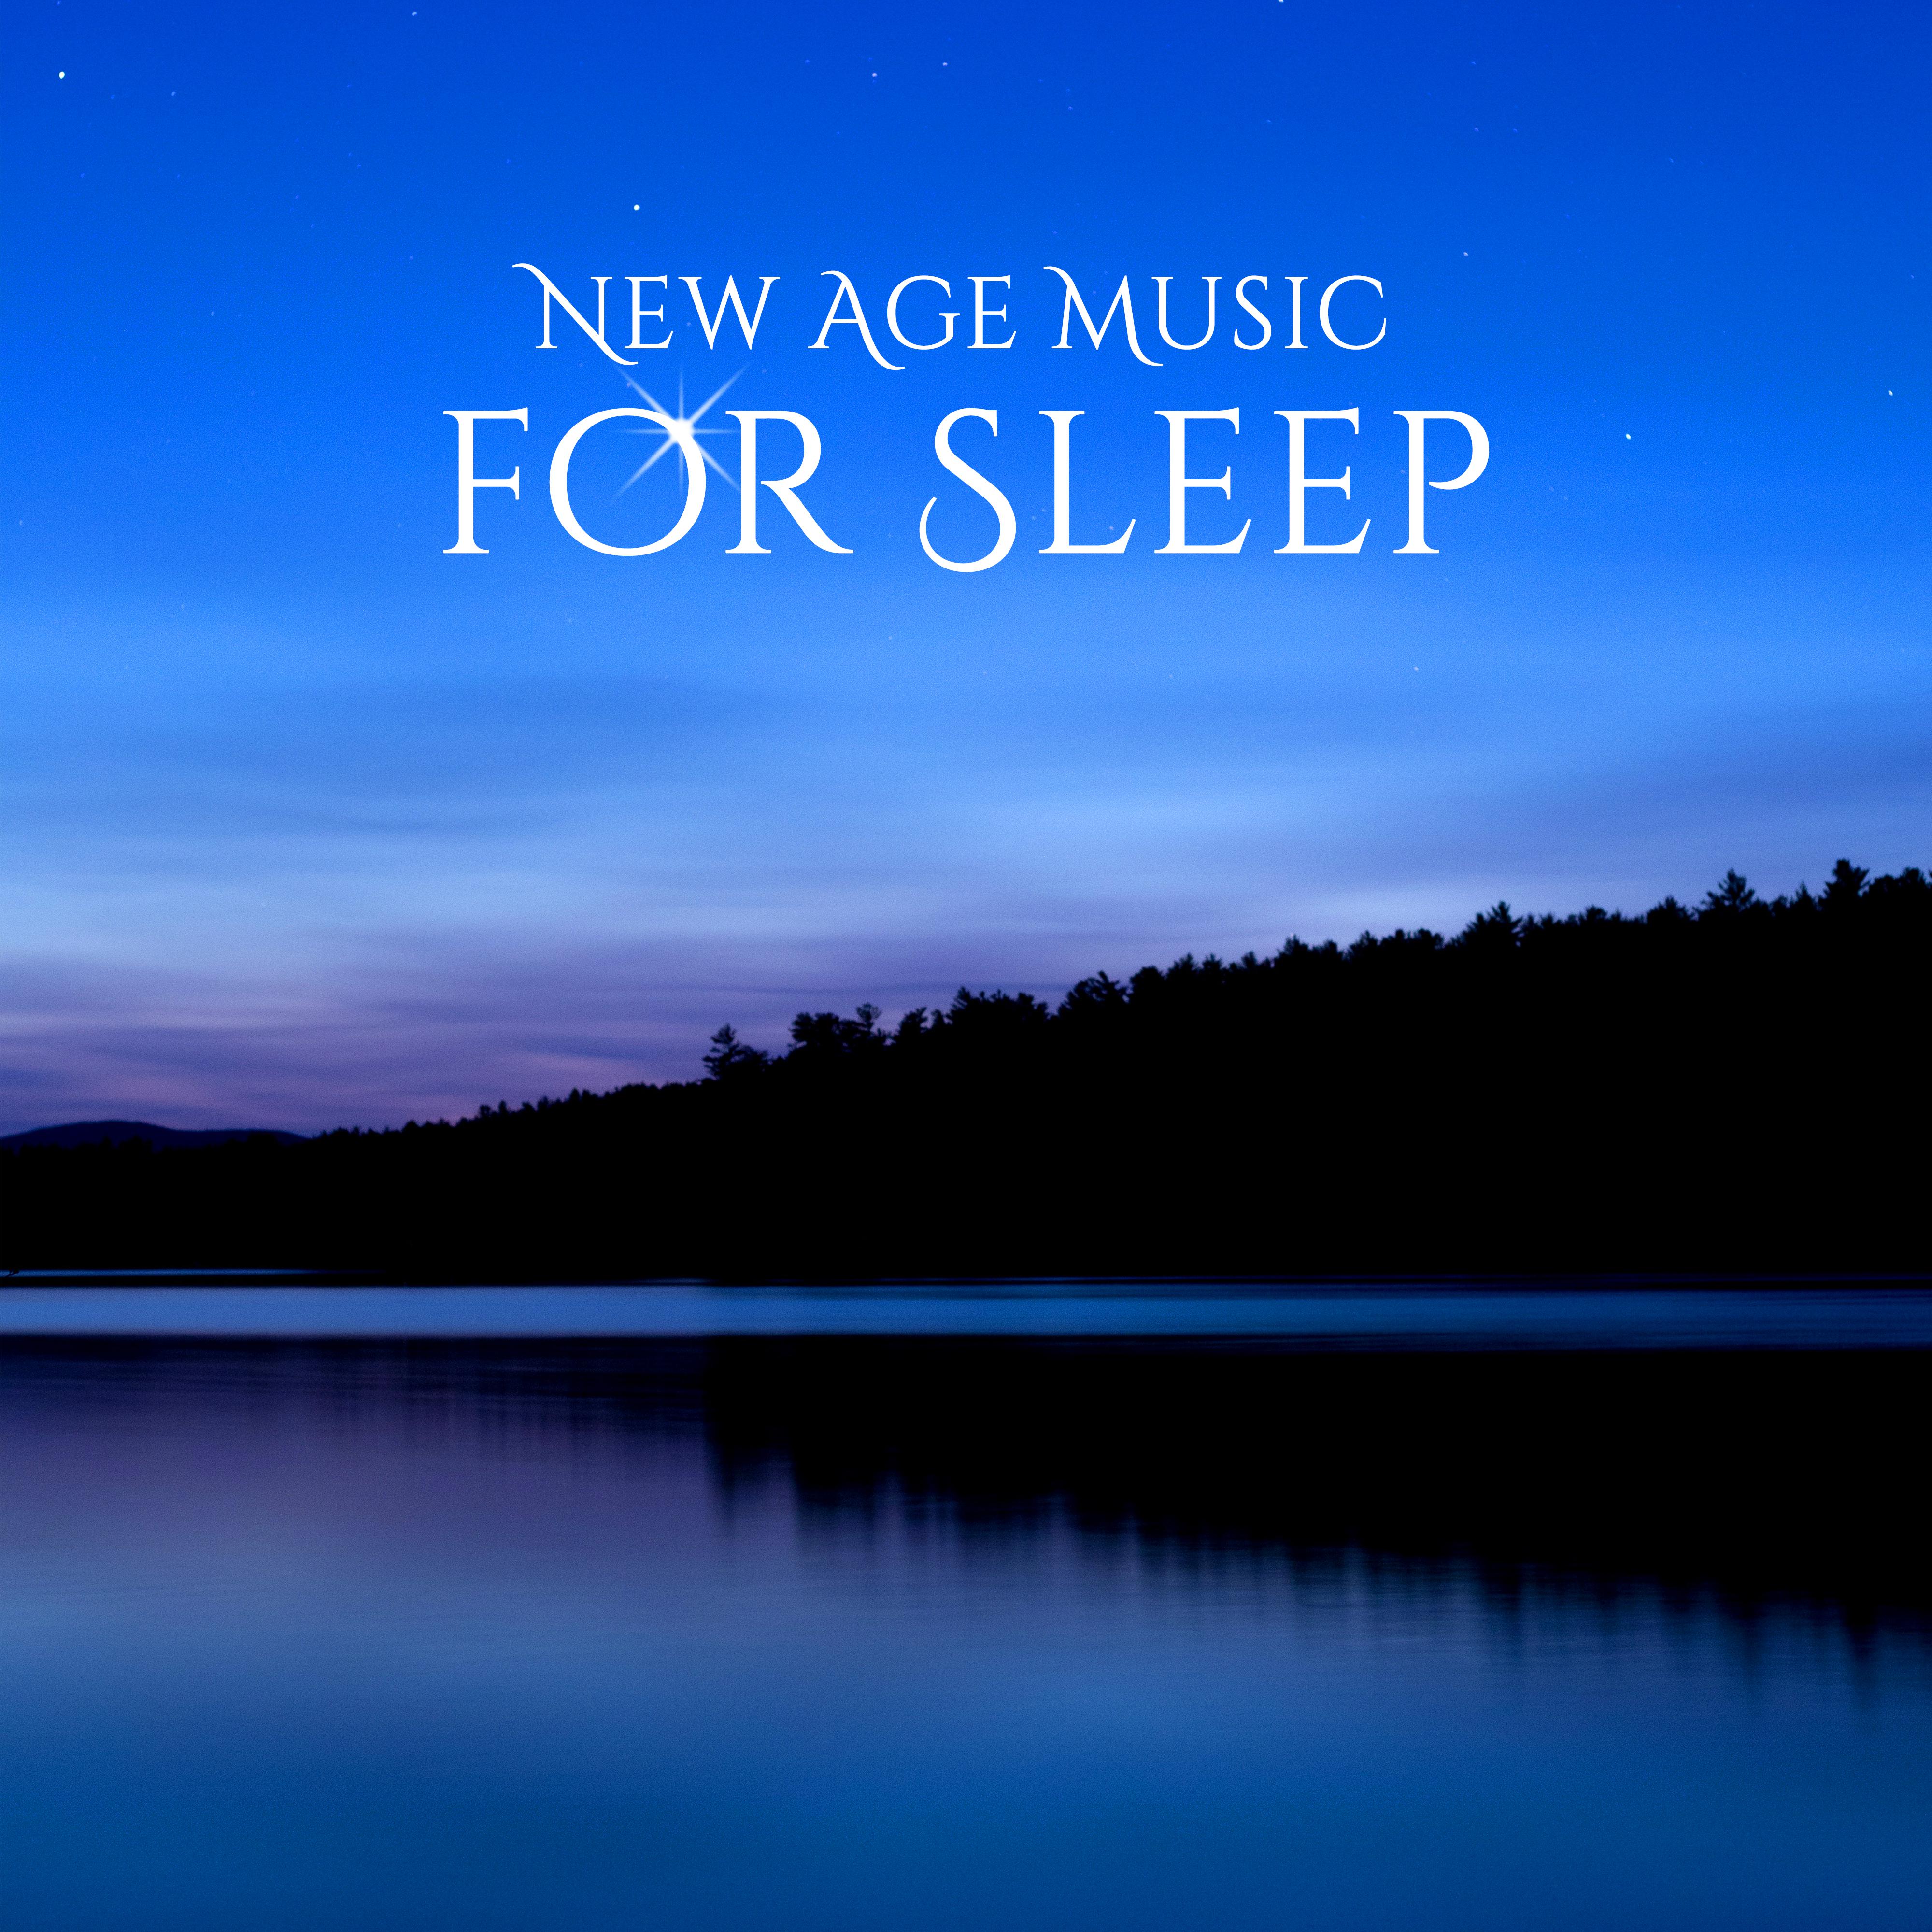 New Age Music for Sleep – Healing Sounds for Rest, Bedtime, Restful Sleep, Deep Dreams, Calm Nap, Relax